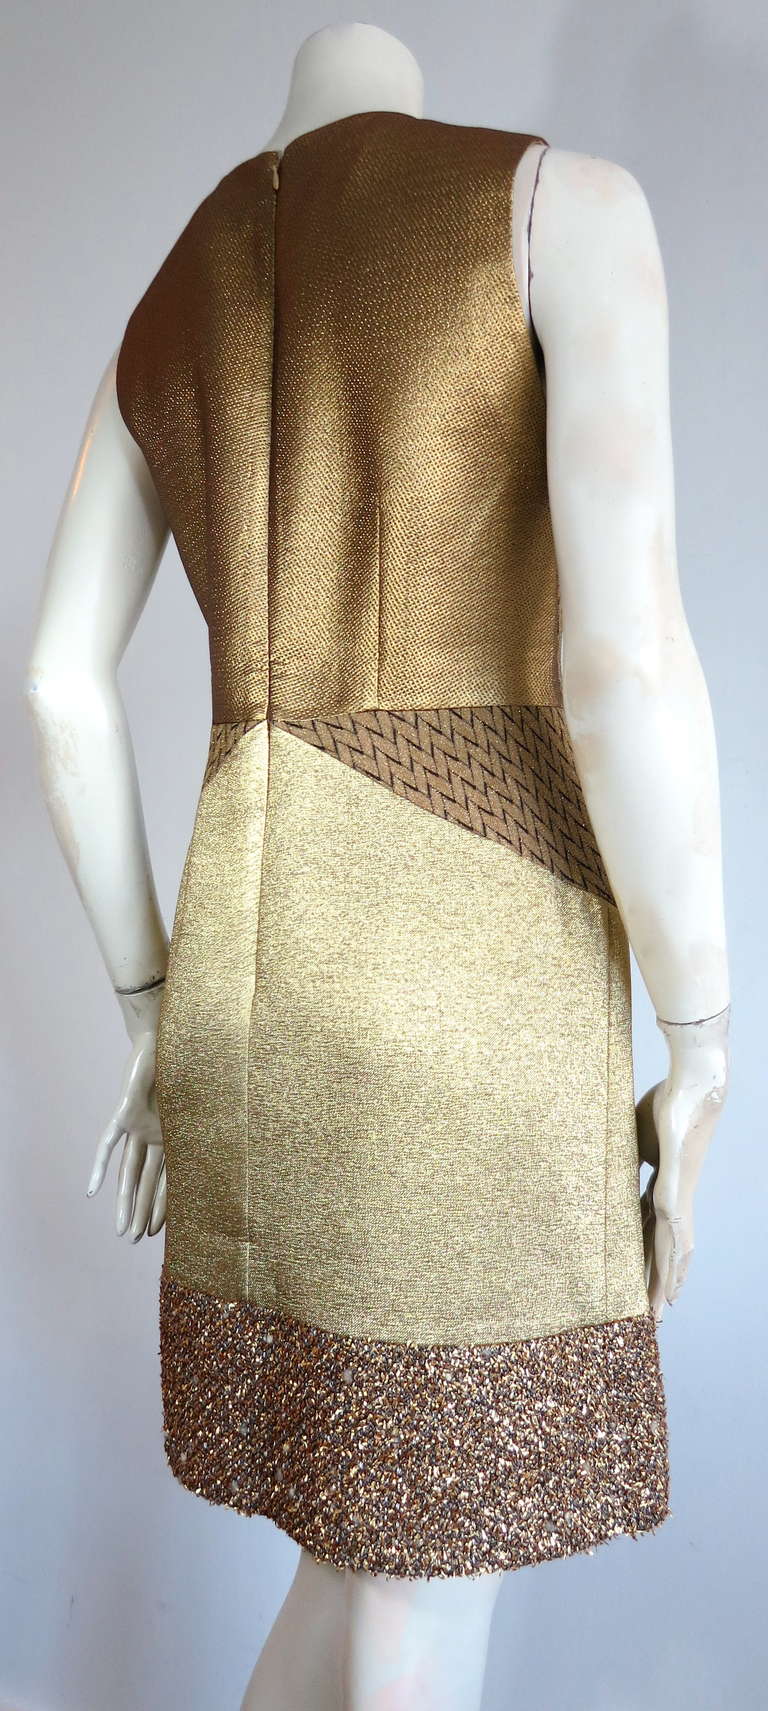 New MISSONI ITALY Metallic gold patchwork cocktail dress 1